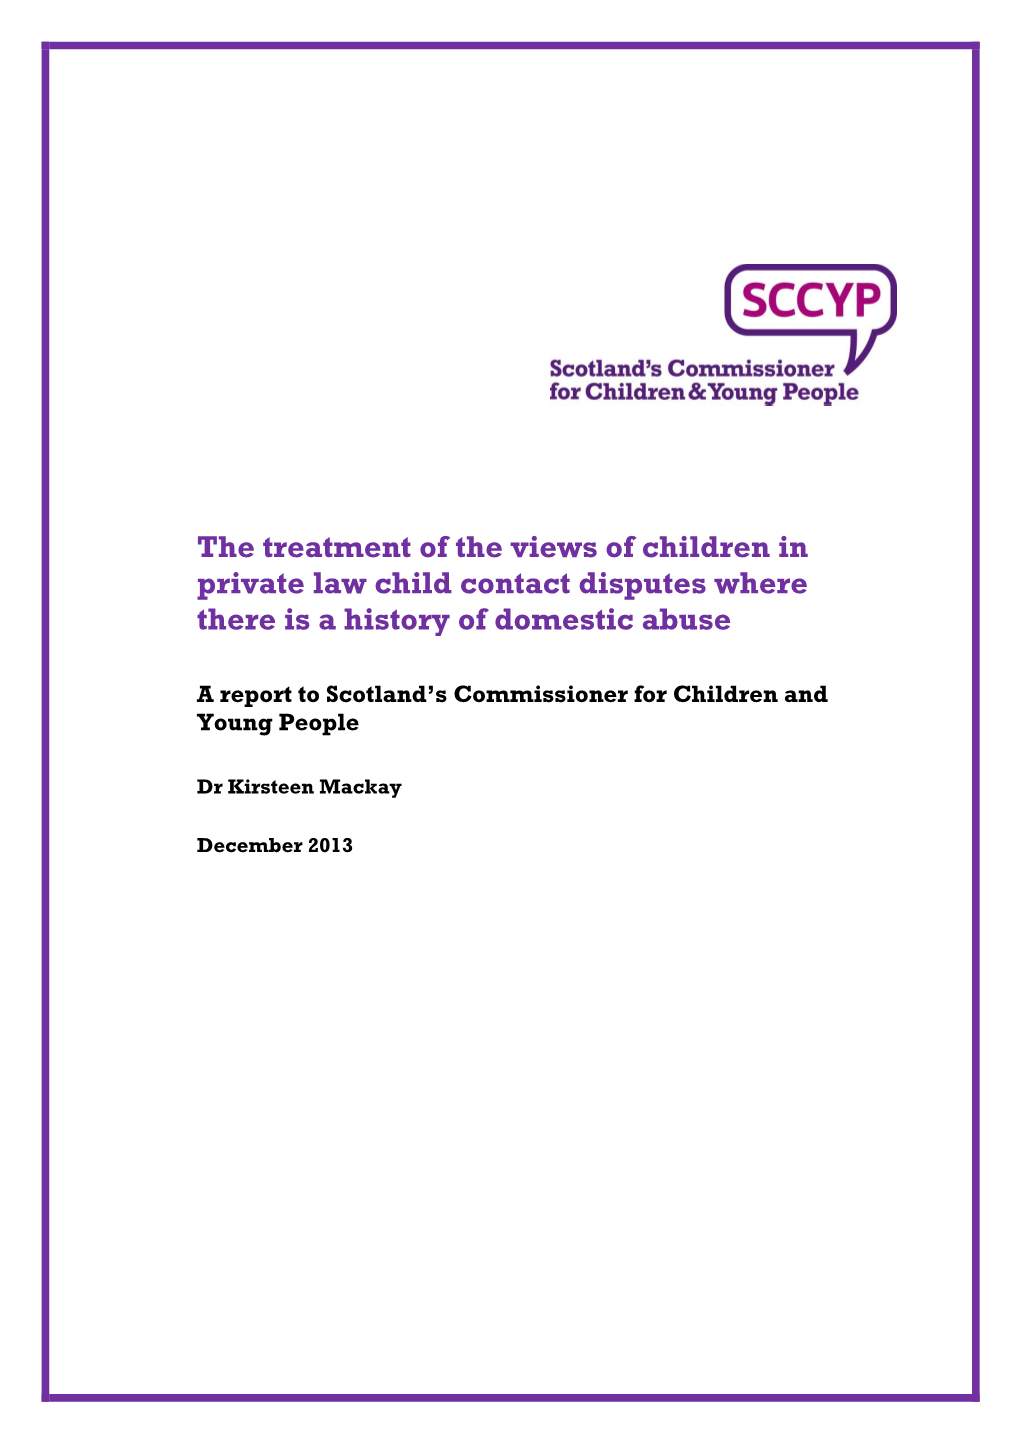 The Treatment of the Views of Children in Private Law Child Contact Disputes Where There Is a History of Domestic Abuse